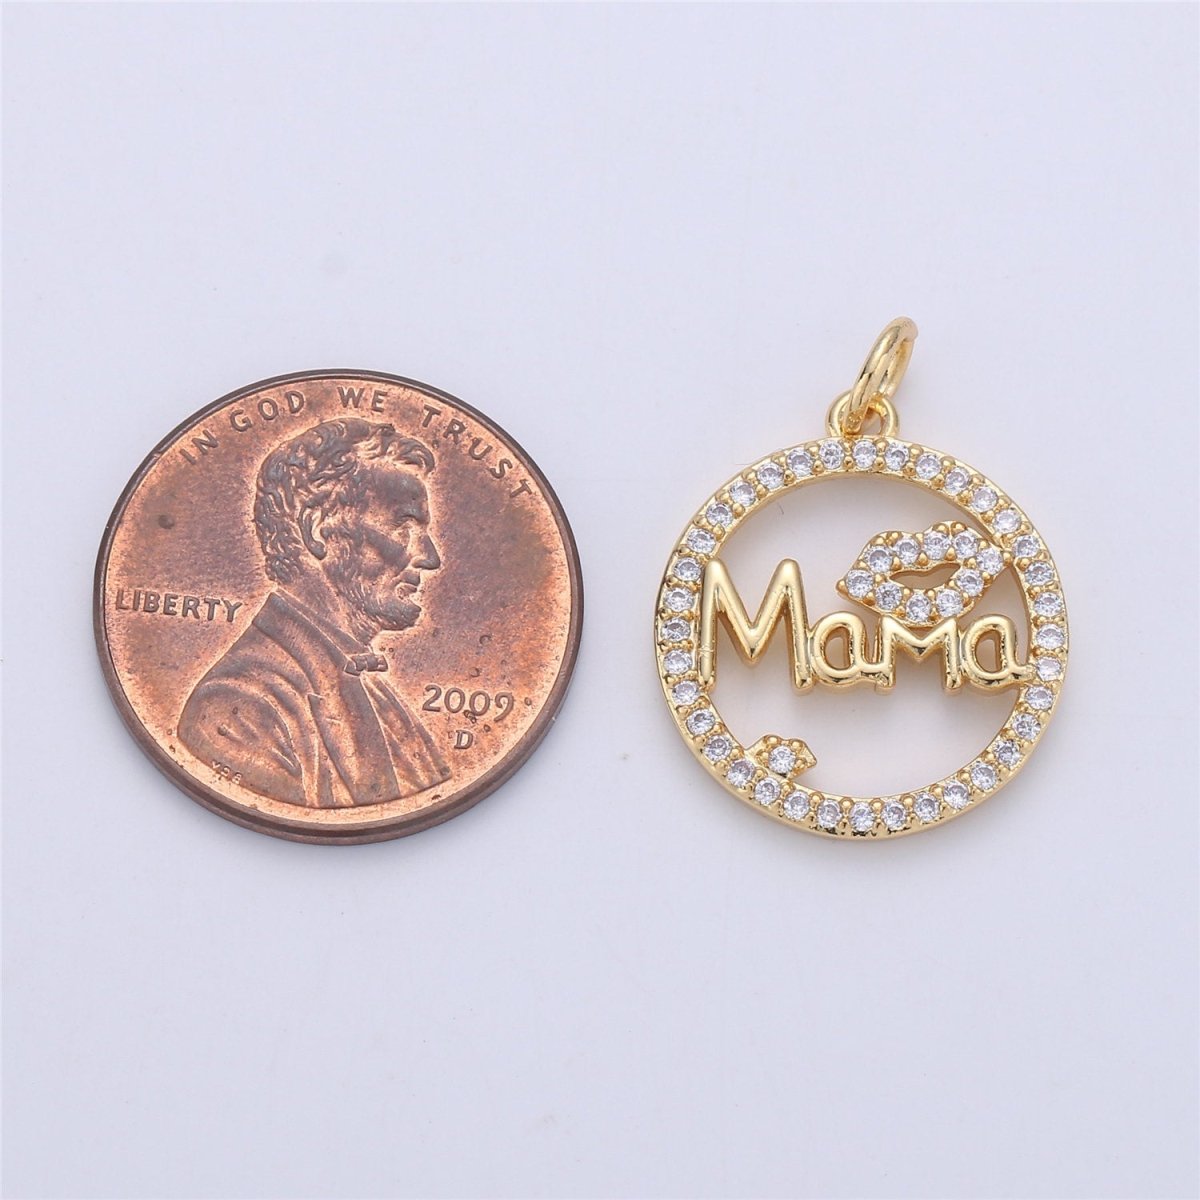 24k Gold Fill Micro Pave Mother Charm - Mama Necklace Charm - Mother Necklace Pendant - Mother's Day Gifts - Mama Letter Necklace Pendant I-563 - DLUXCA